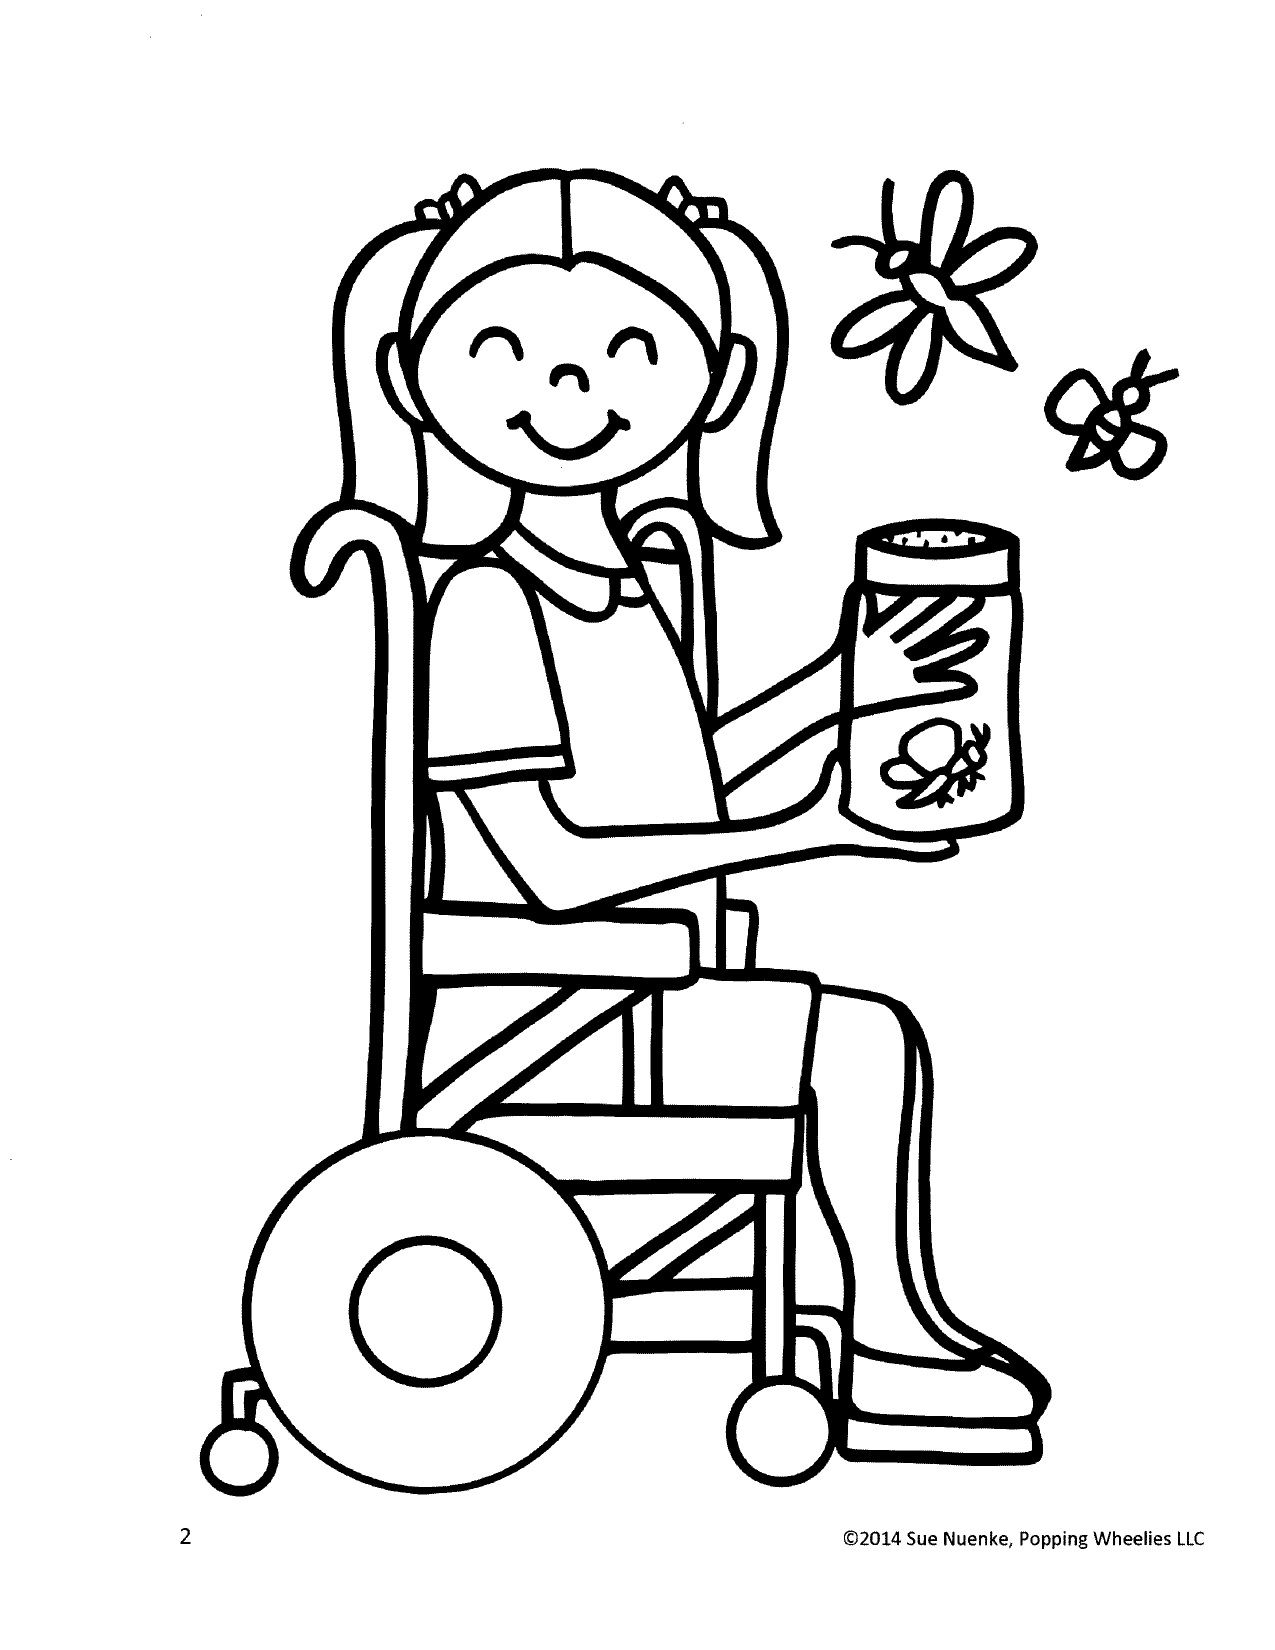 This Mom Created Coloring Books That Feature Kids With ...